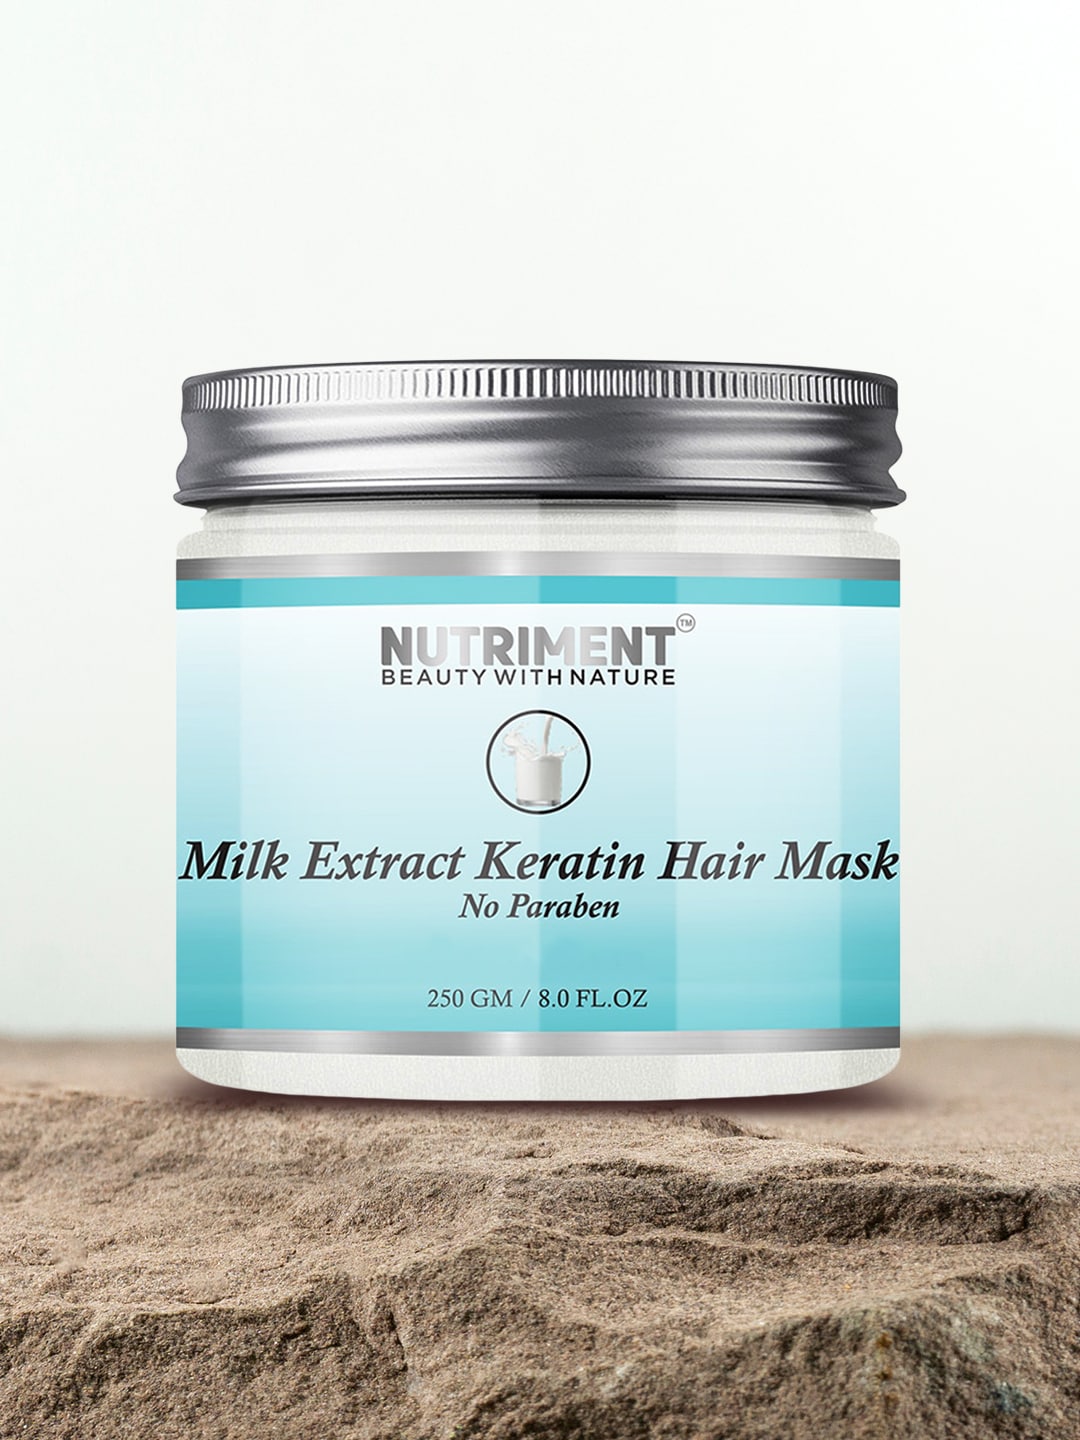 Nutriment Milk Extract Kertain Hair Mask 250 gm Price in India